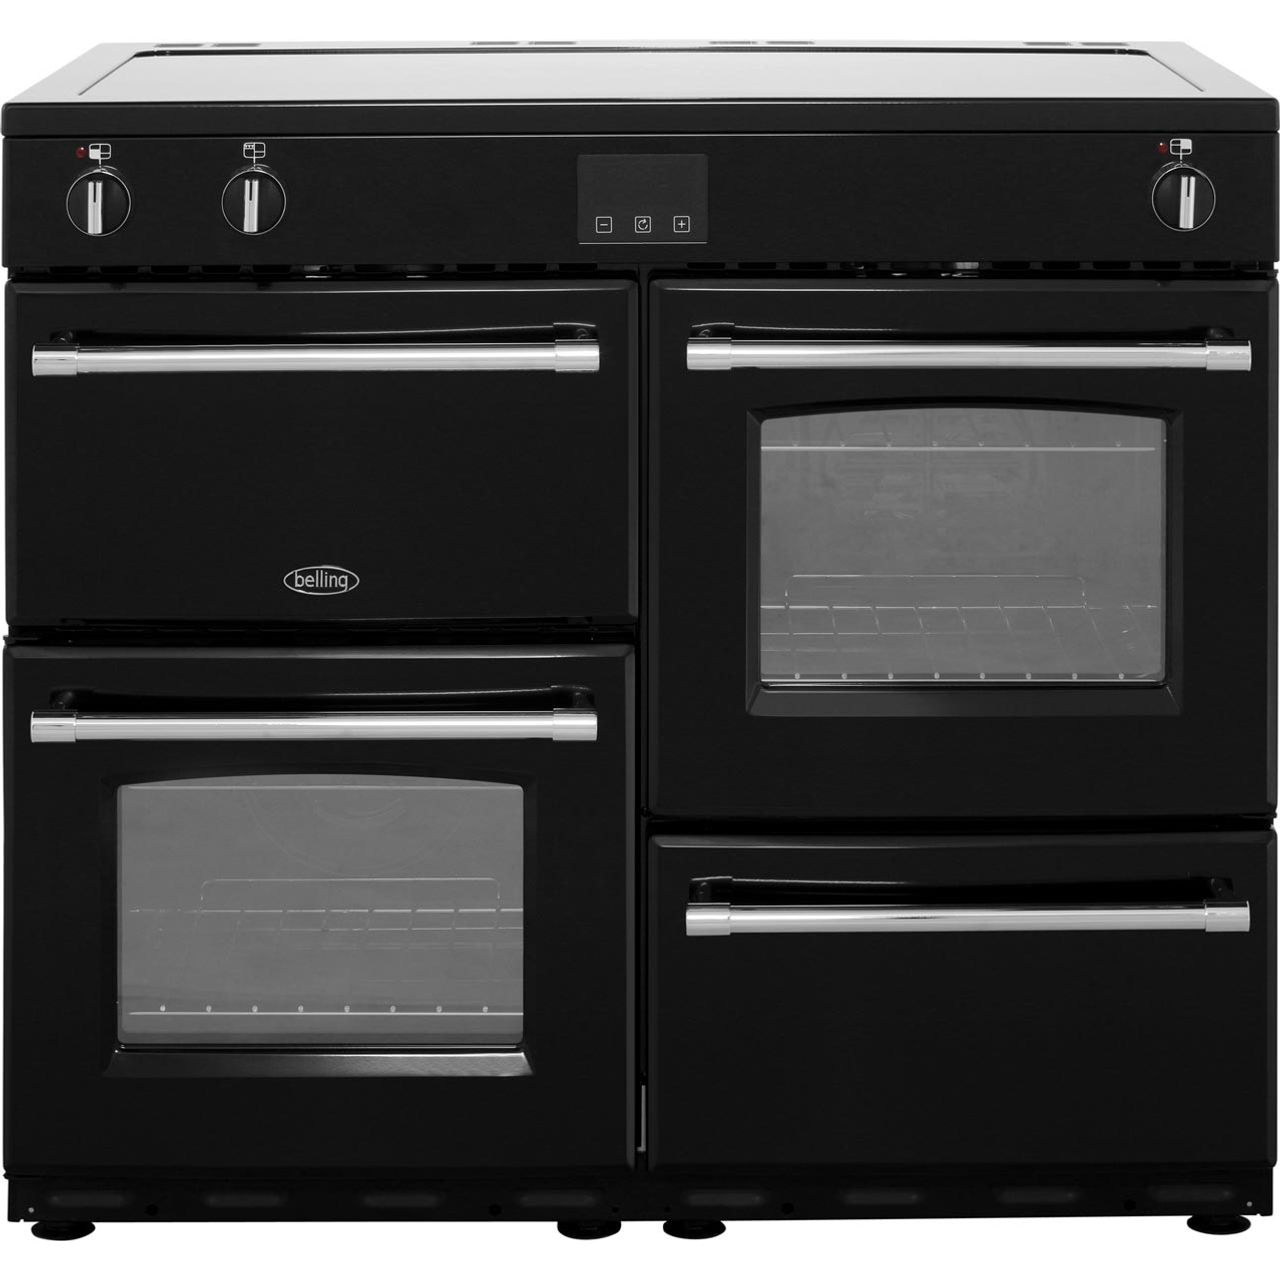 Belling Farmhouse100Ei 100cm Electric Range Cooker with Induction Hob Review